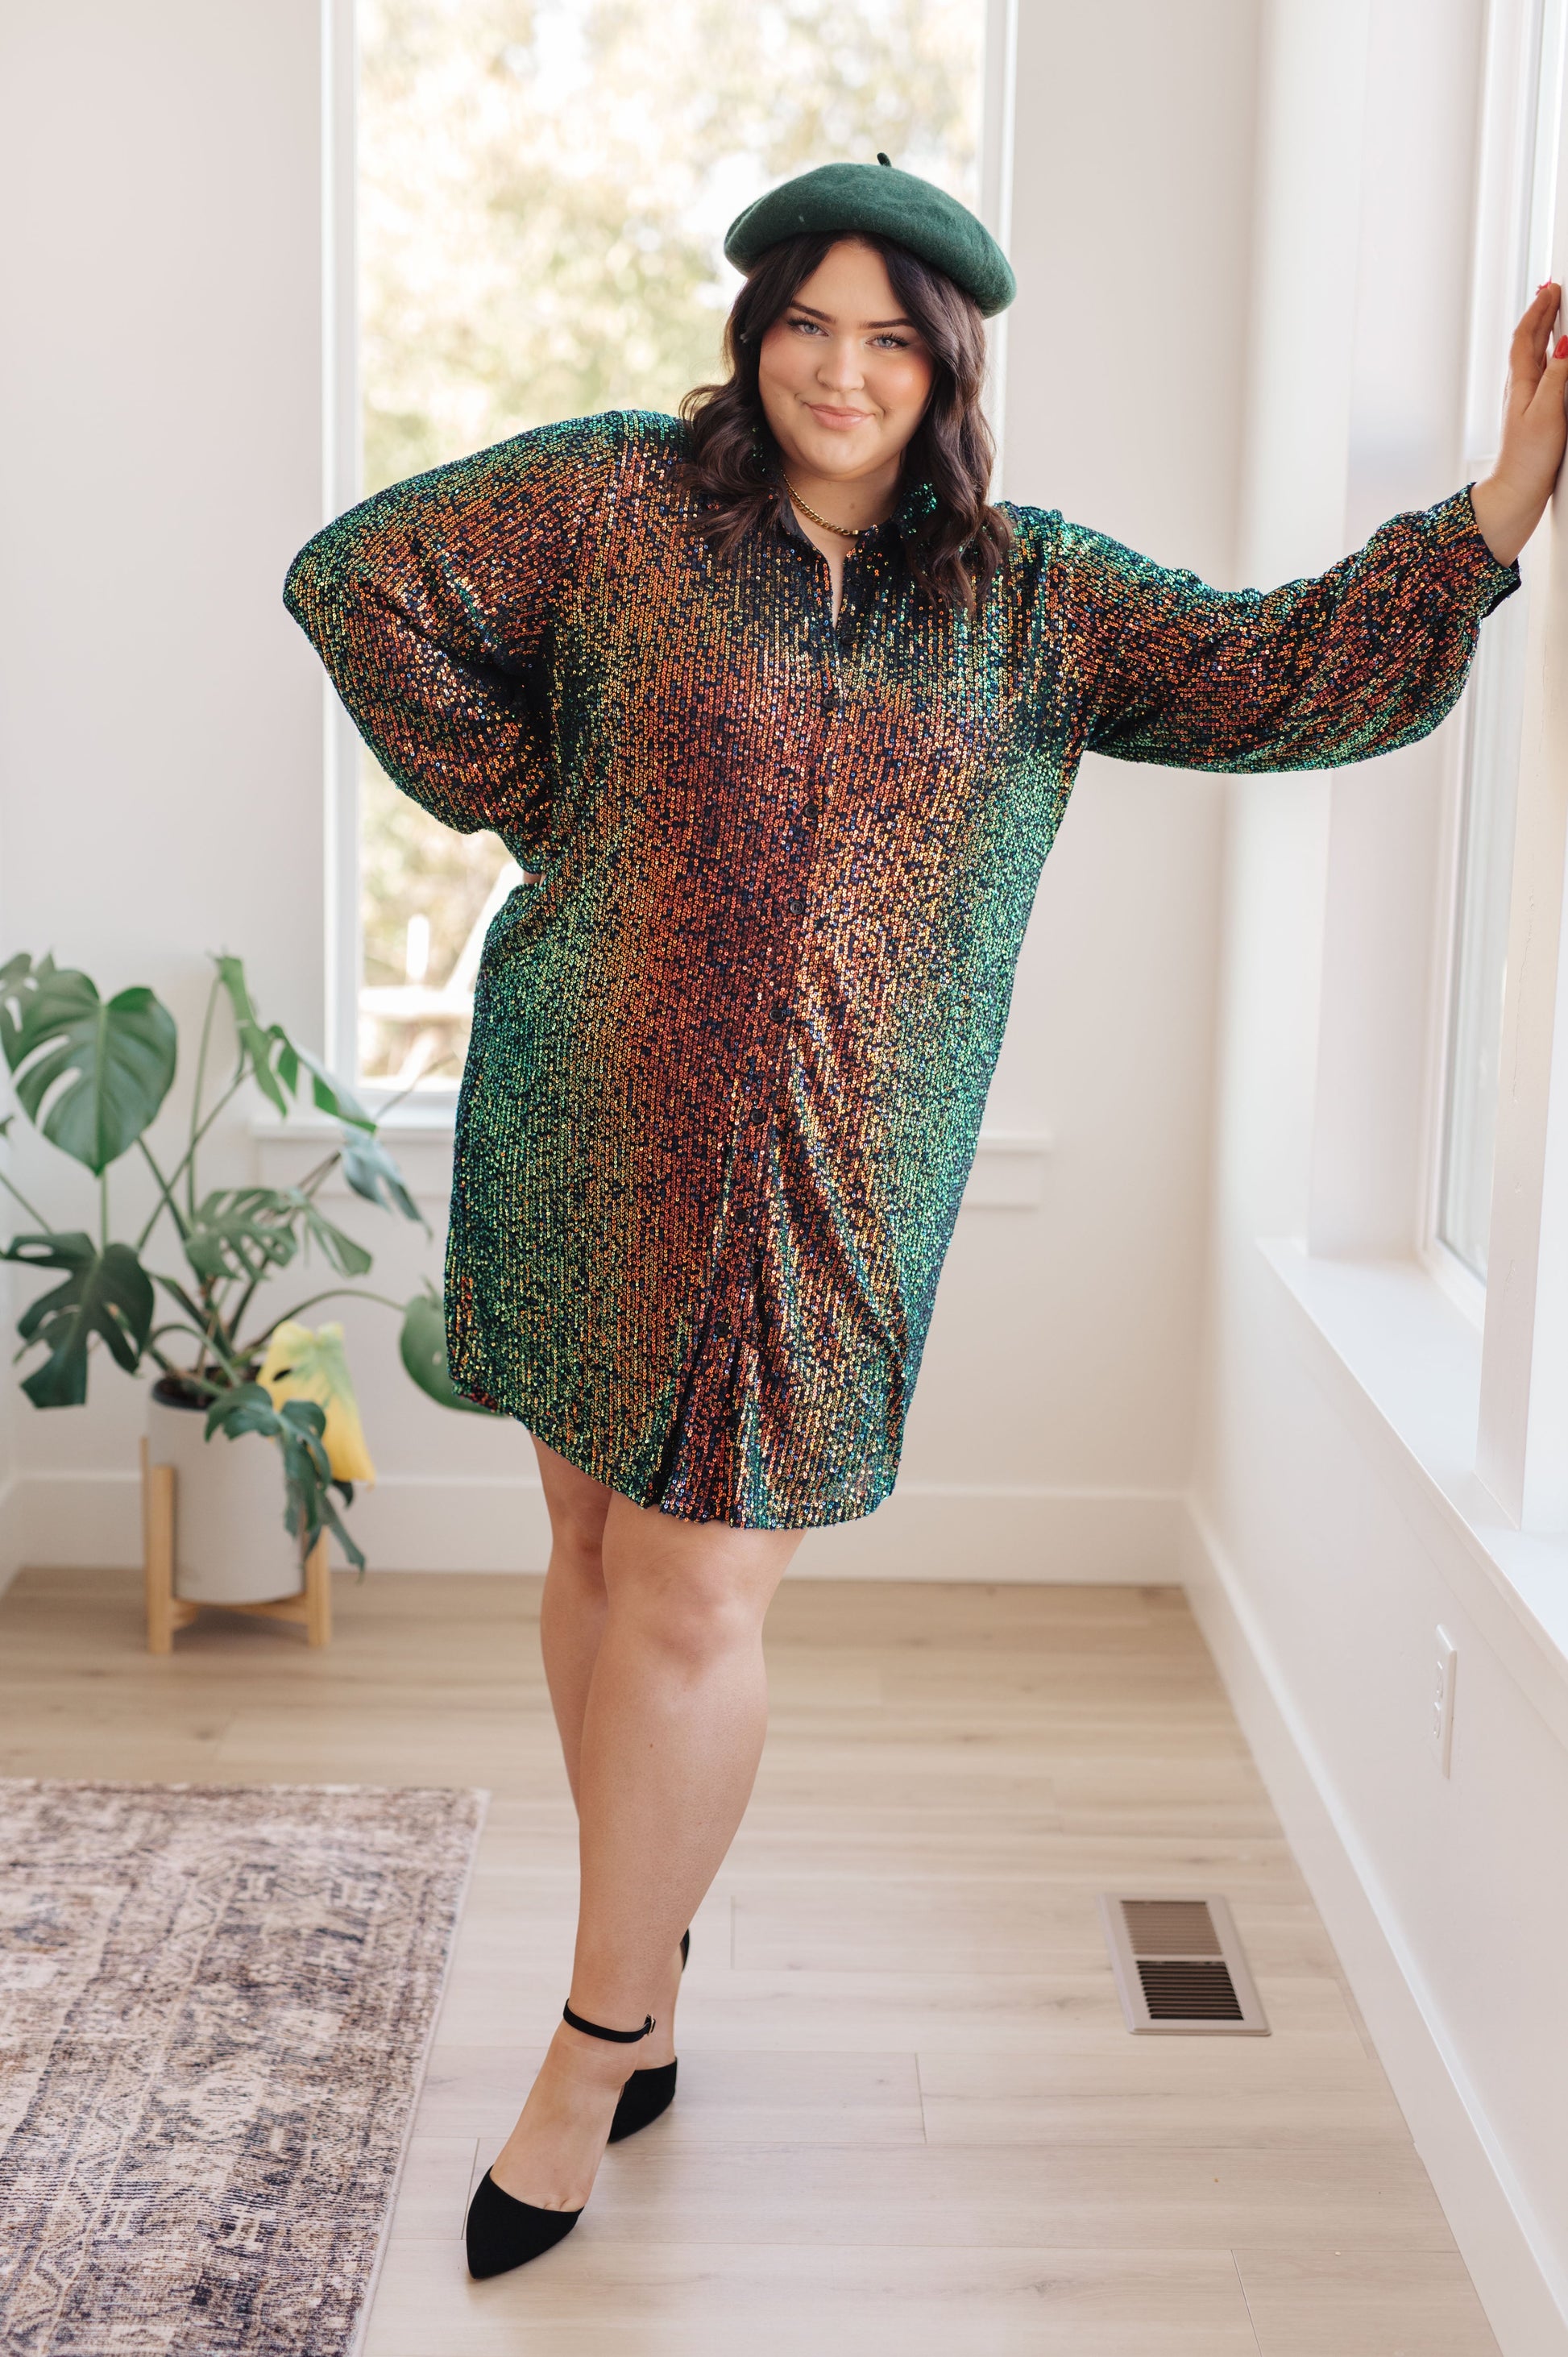 This Shimmering Splendor Sequin Shirt Dress is the perfect statement piece for any occasion. Featuring a collared neck, long sleeves and buttoned cuffs, you can feel confident that you'll look fabulous. The sequins give you an eye-catching shimmer that will make you shine brighter than anyone else in the room. S -3X